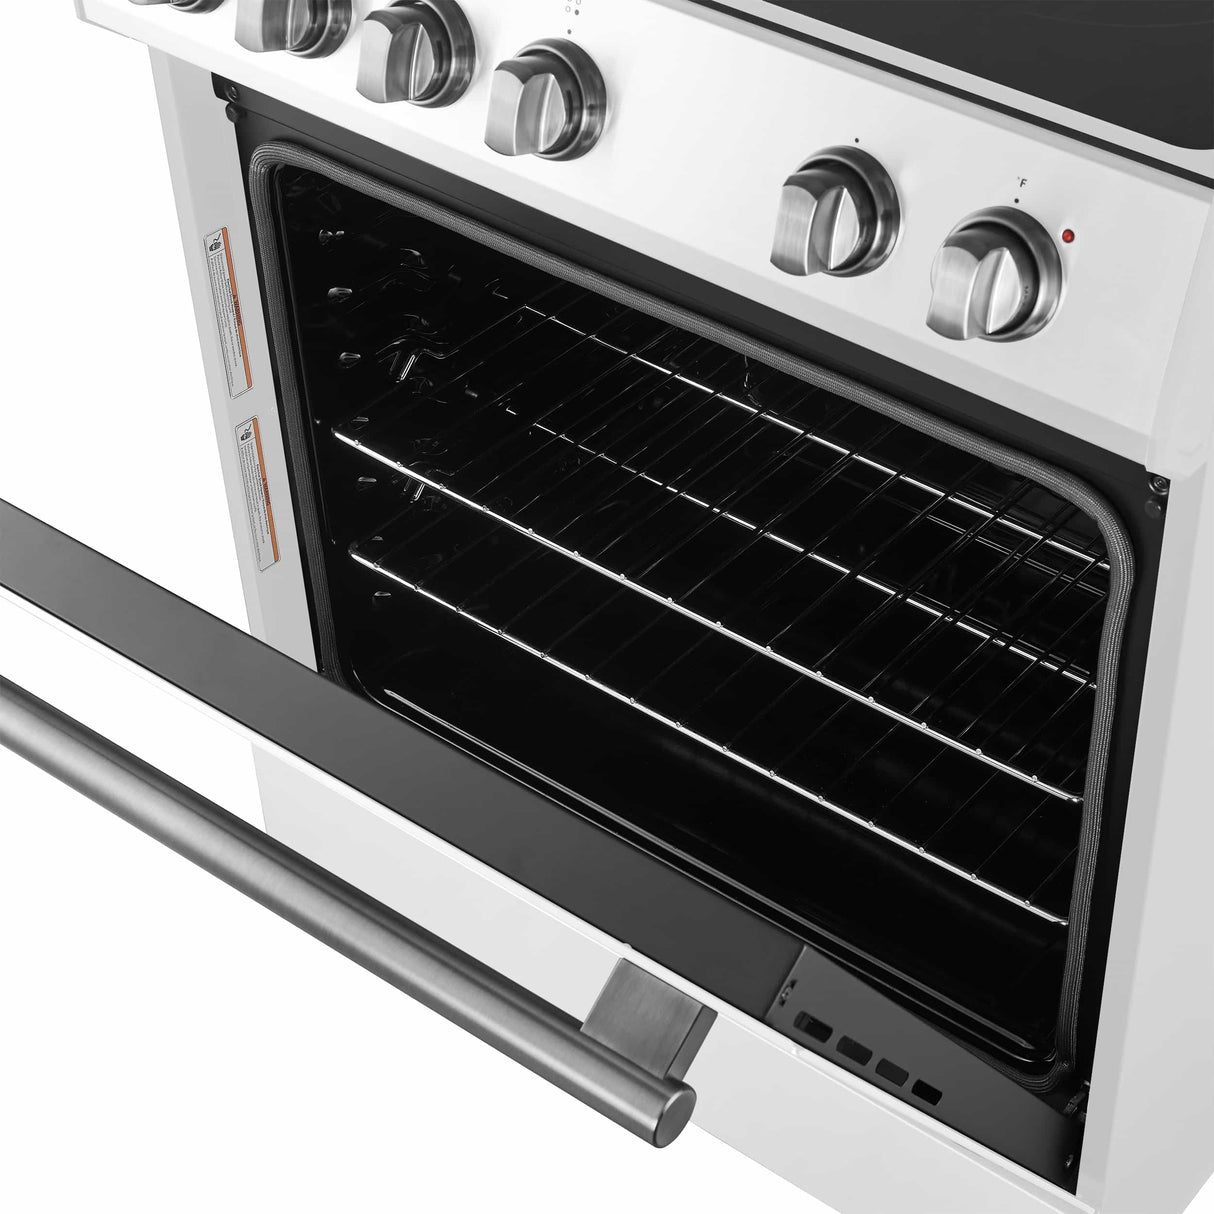 Forno Leonardo Espresso 30-Inch Electric Range with 5.0 cu. Ft. Electric Oven in White in Stainless Steel Trim (FFSEL6012-30WHT)